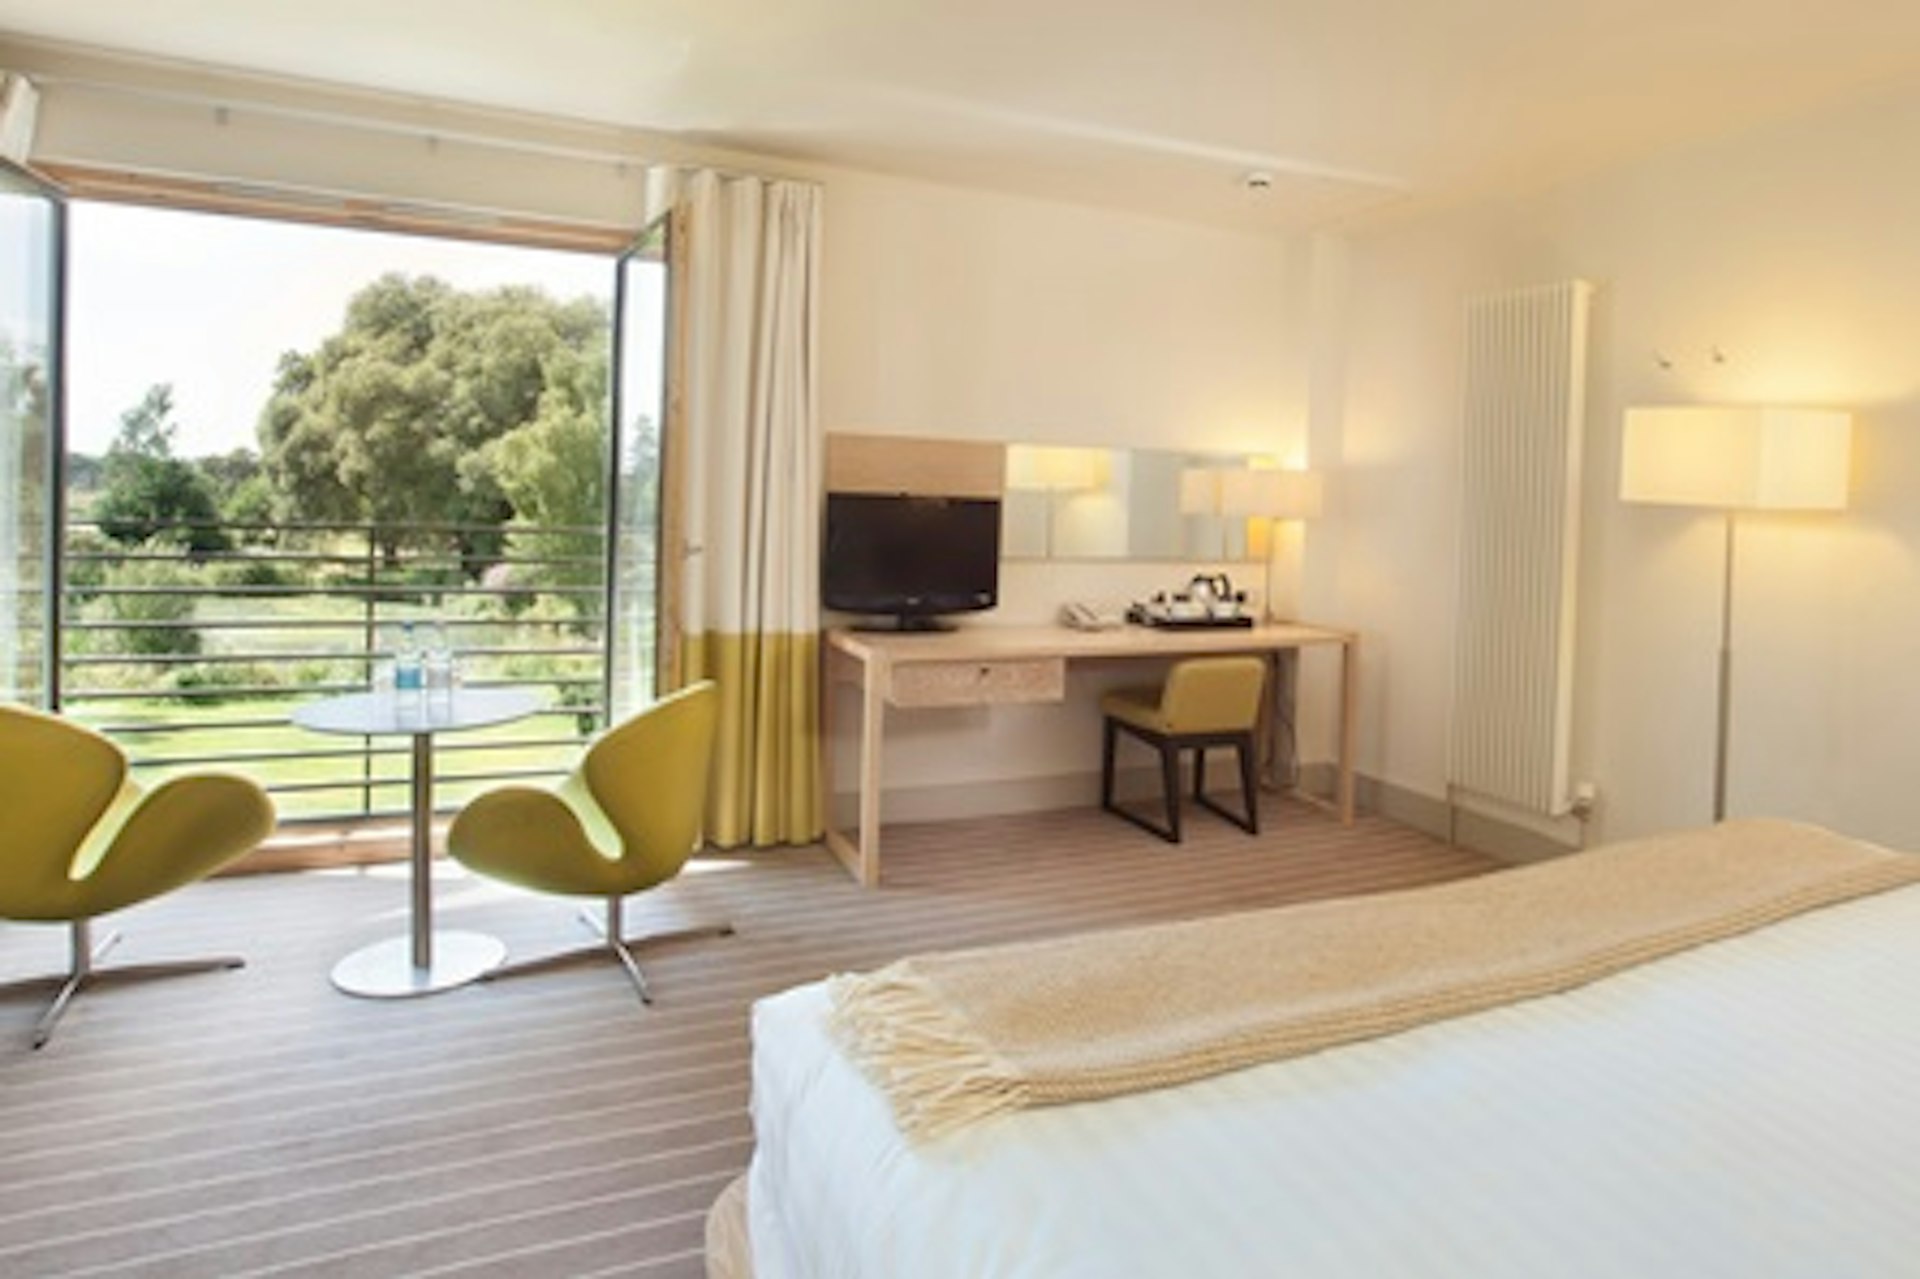 Two Night Stay with Dinner for Two at The Lifehouse Spa & Hotel 1